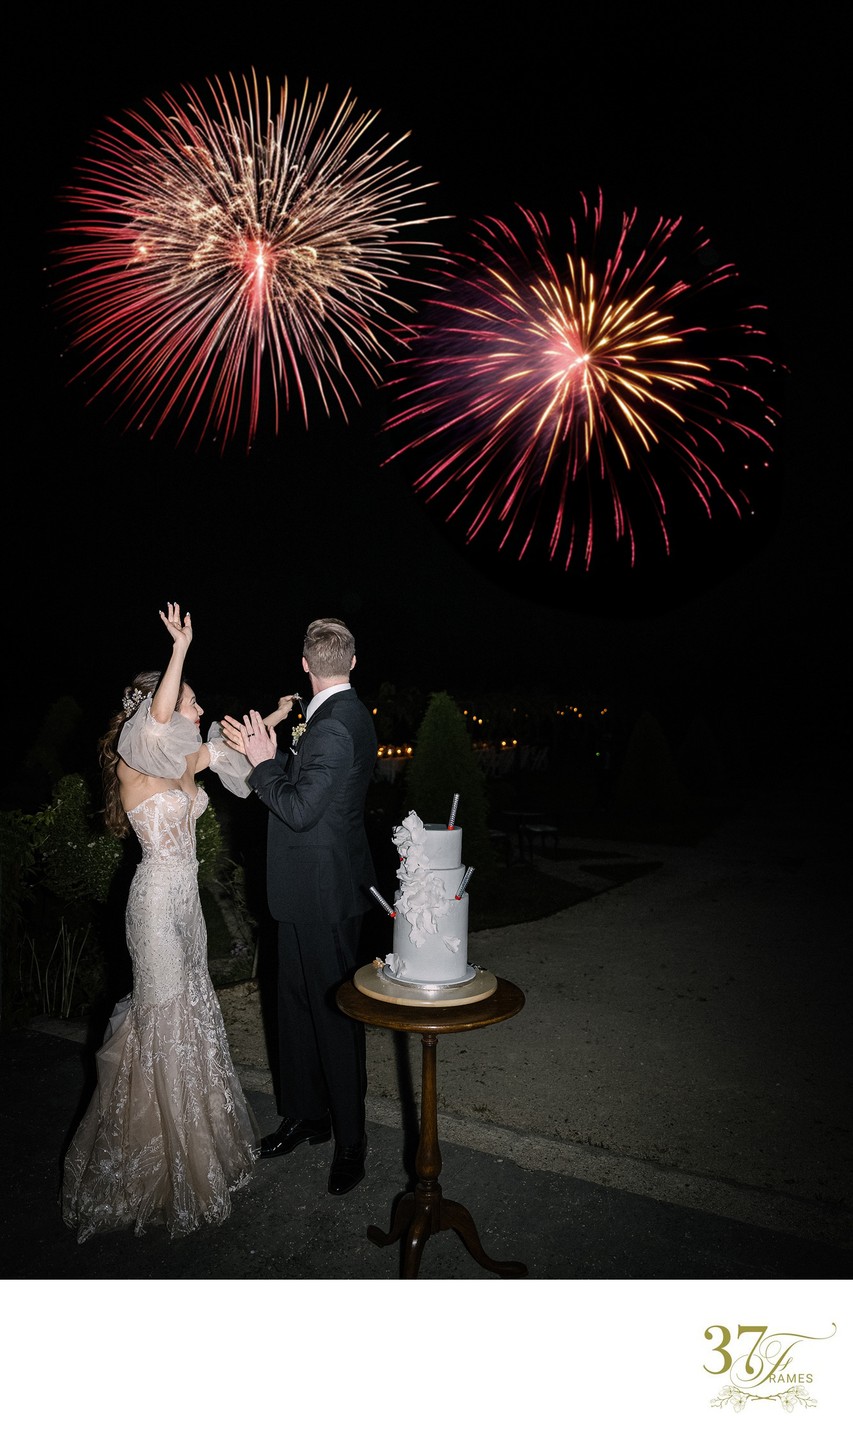 Fireworks Take Center Stage at Château Wedding